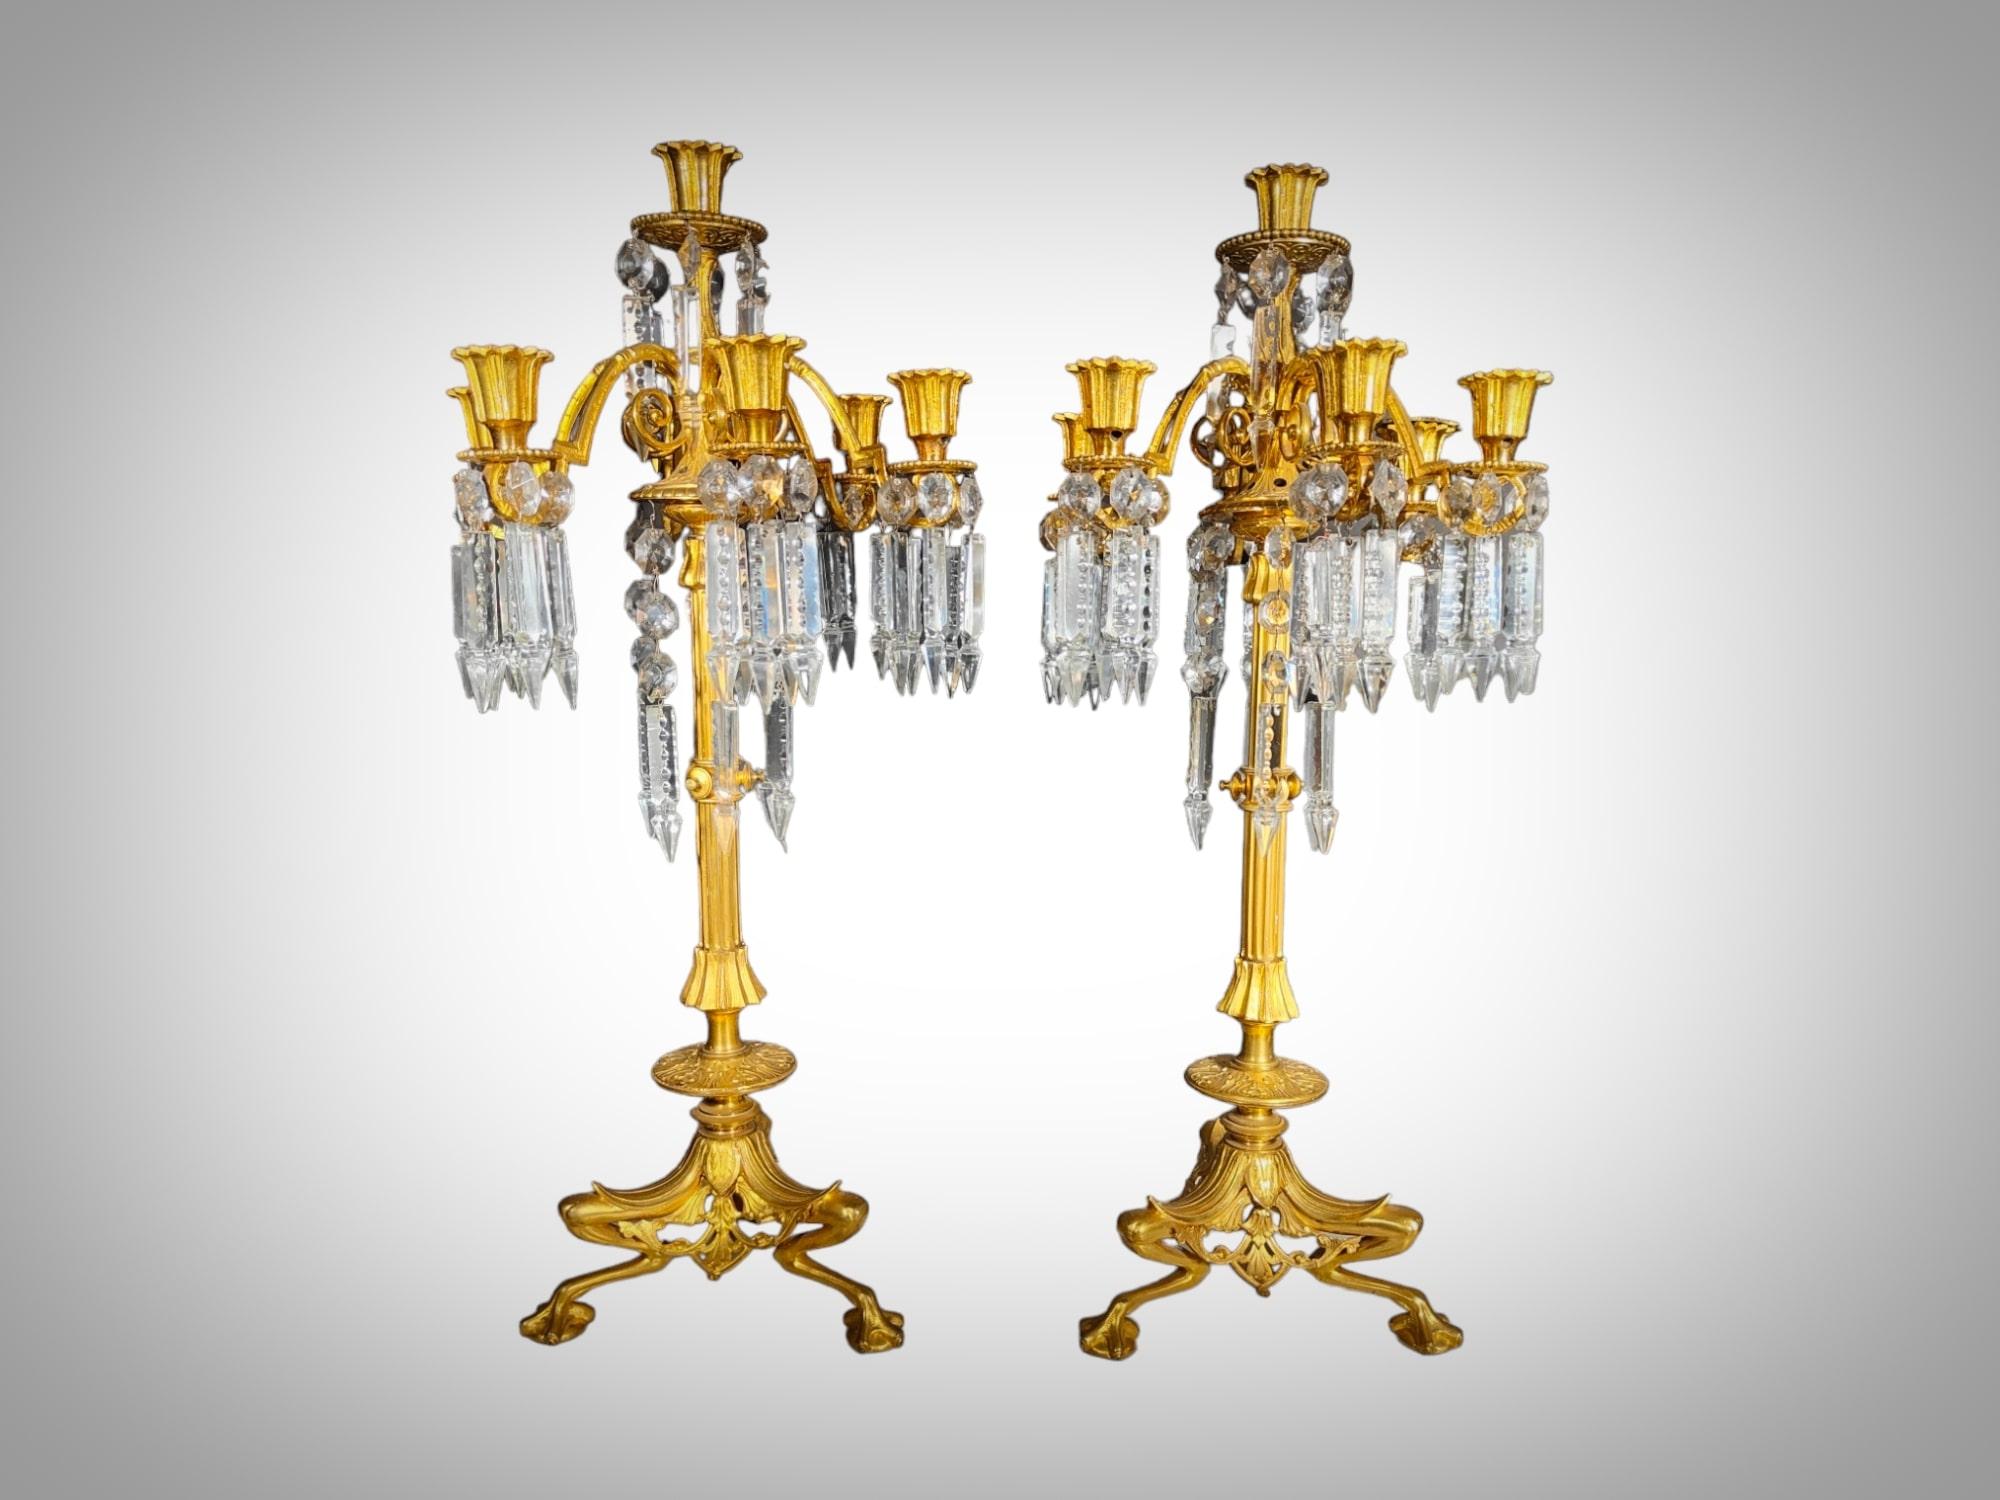 Immerse yourself in the opulence of the 19th century with these stunning candelabras, a masterful fusion of gilded bronze and wheel-cut crystals. Every detail of these candelabras evokes an era of artistic refinement and splendor, creating a piece